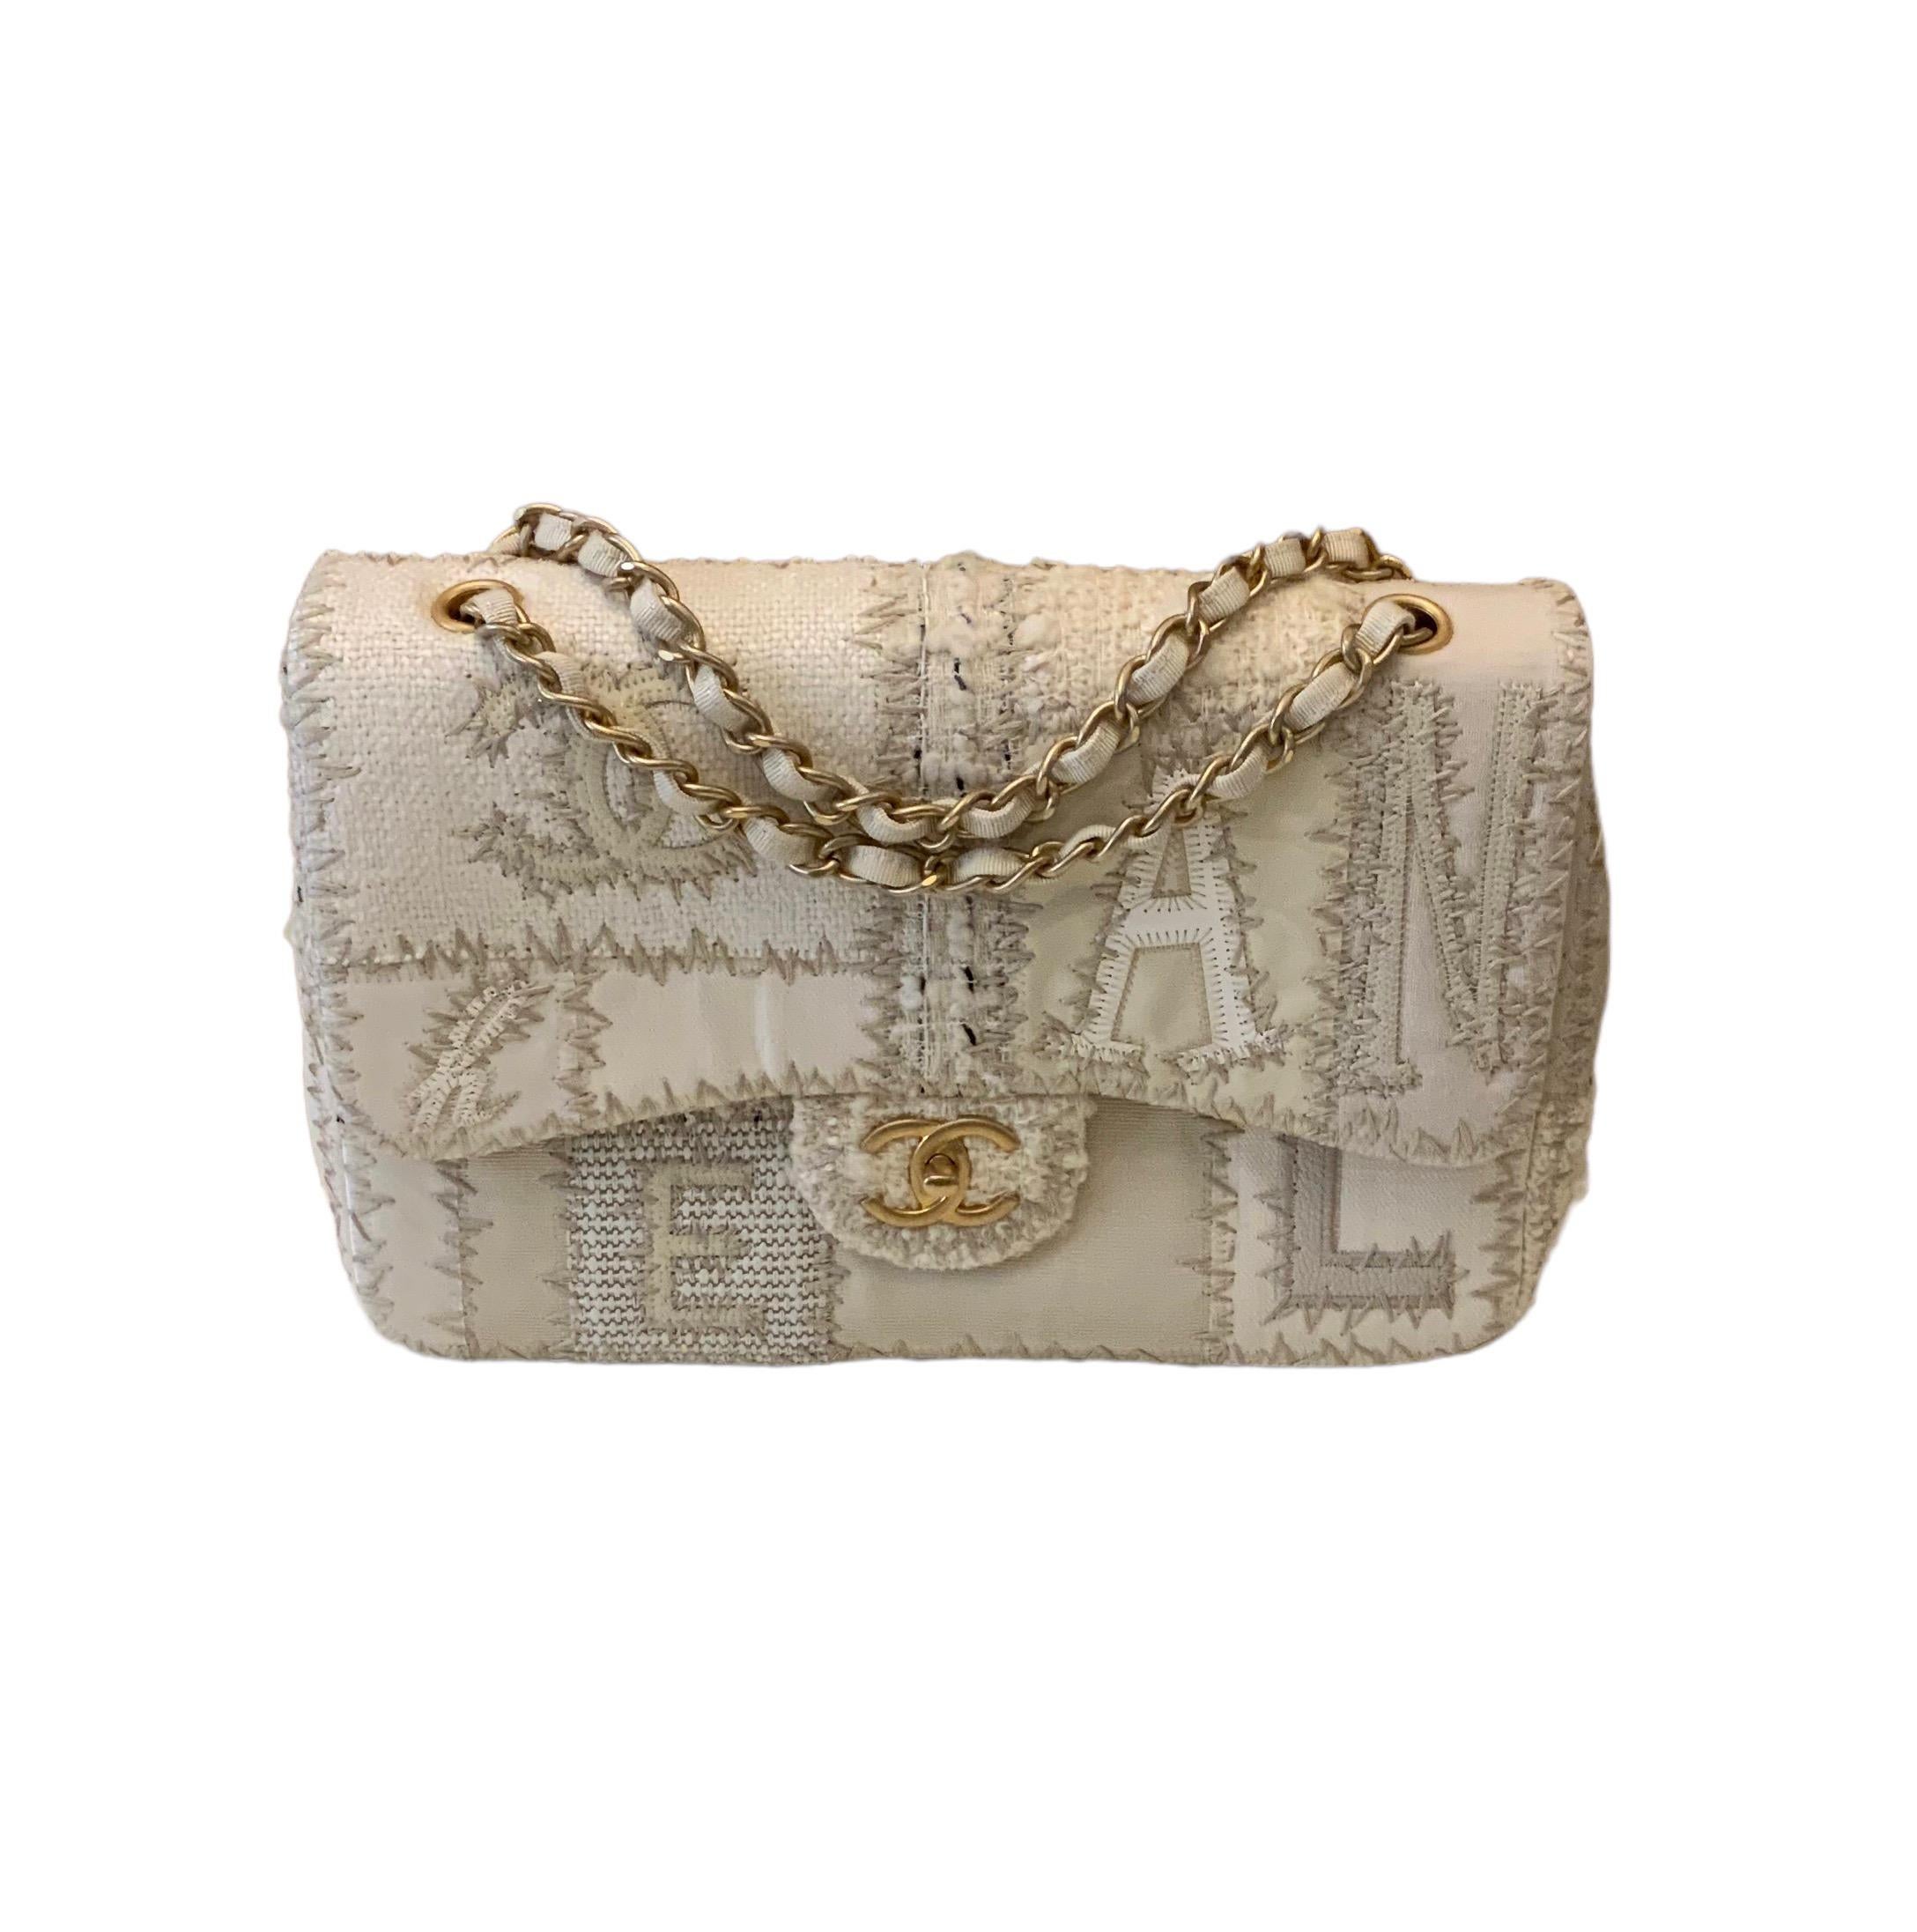 This pre-owned but in fabulous condition is a must-have piece from the house of Chanel and the 